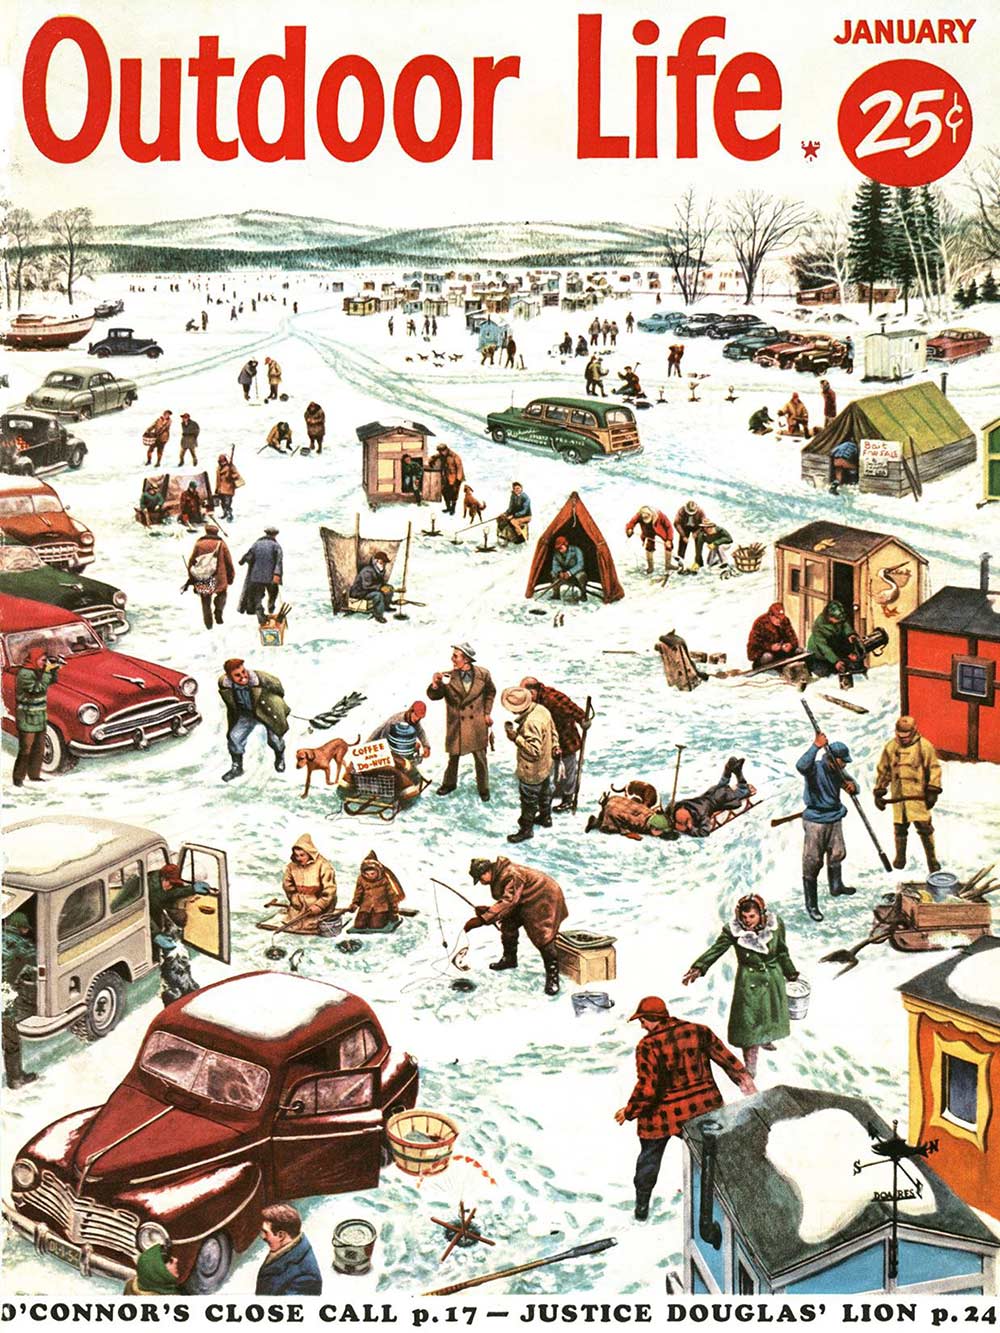 January 1954 Cover of Outdoor Life